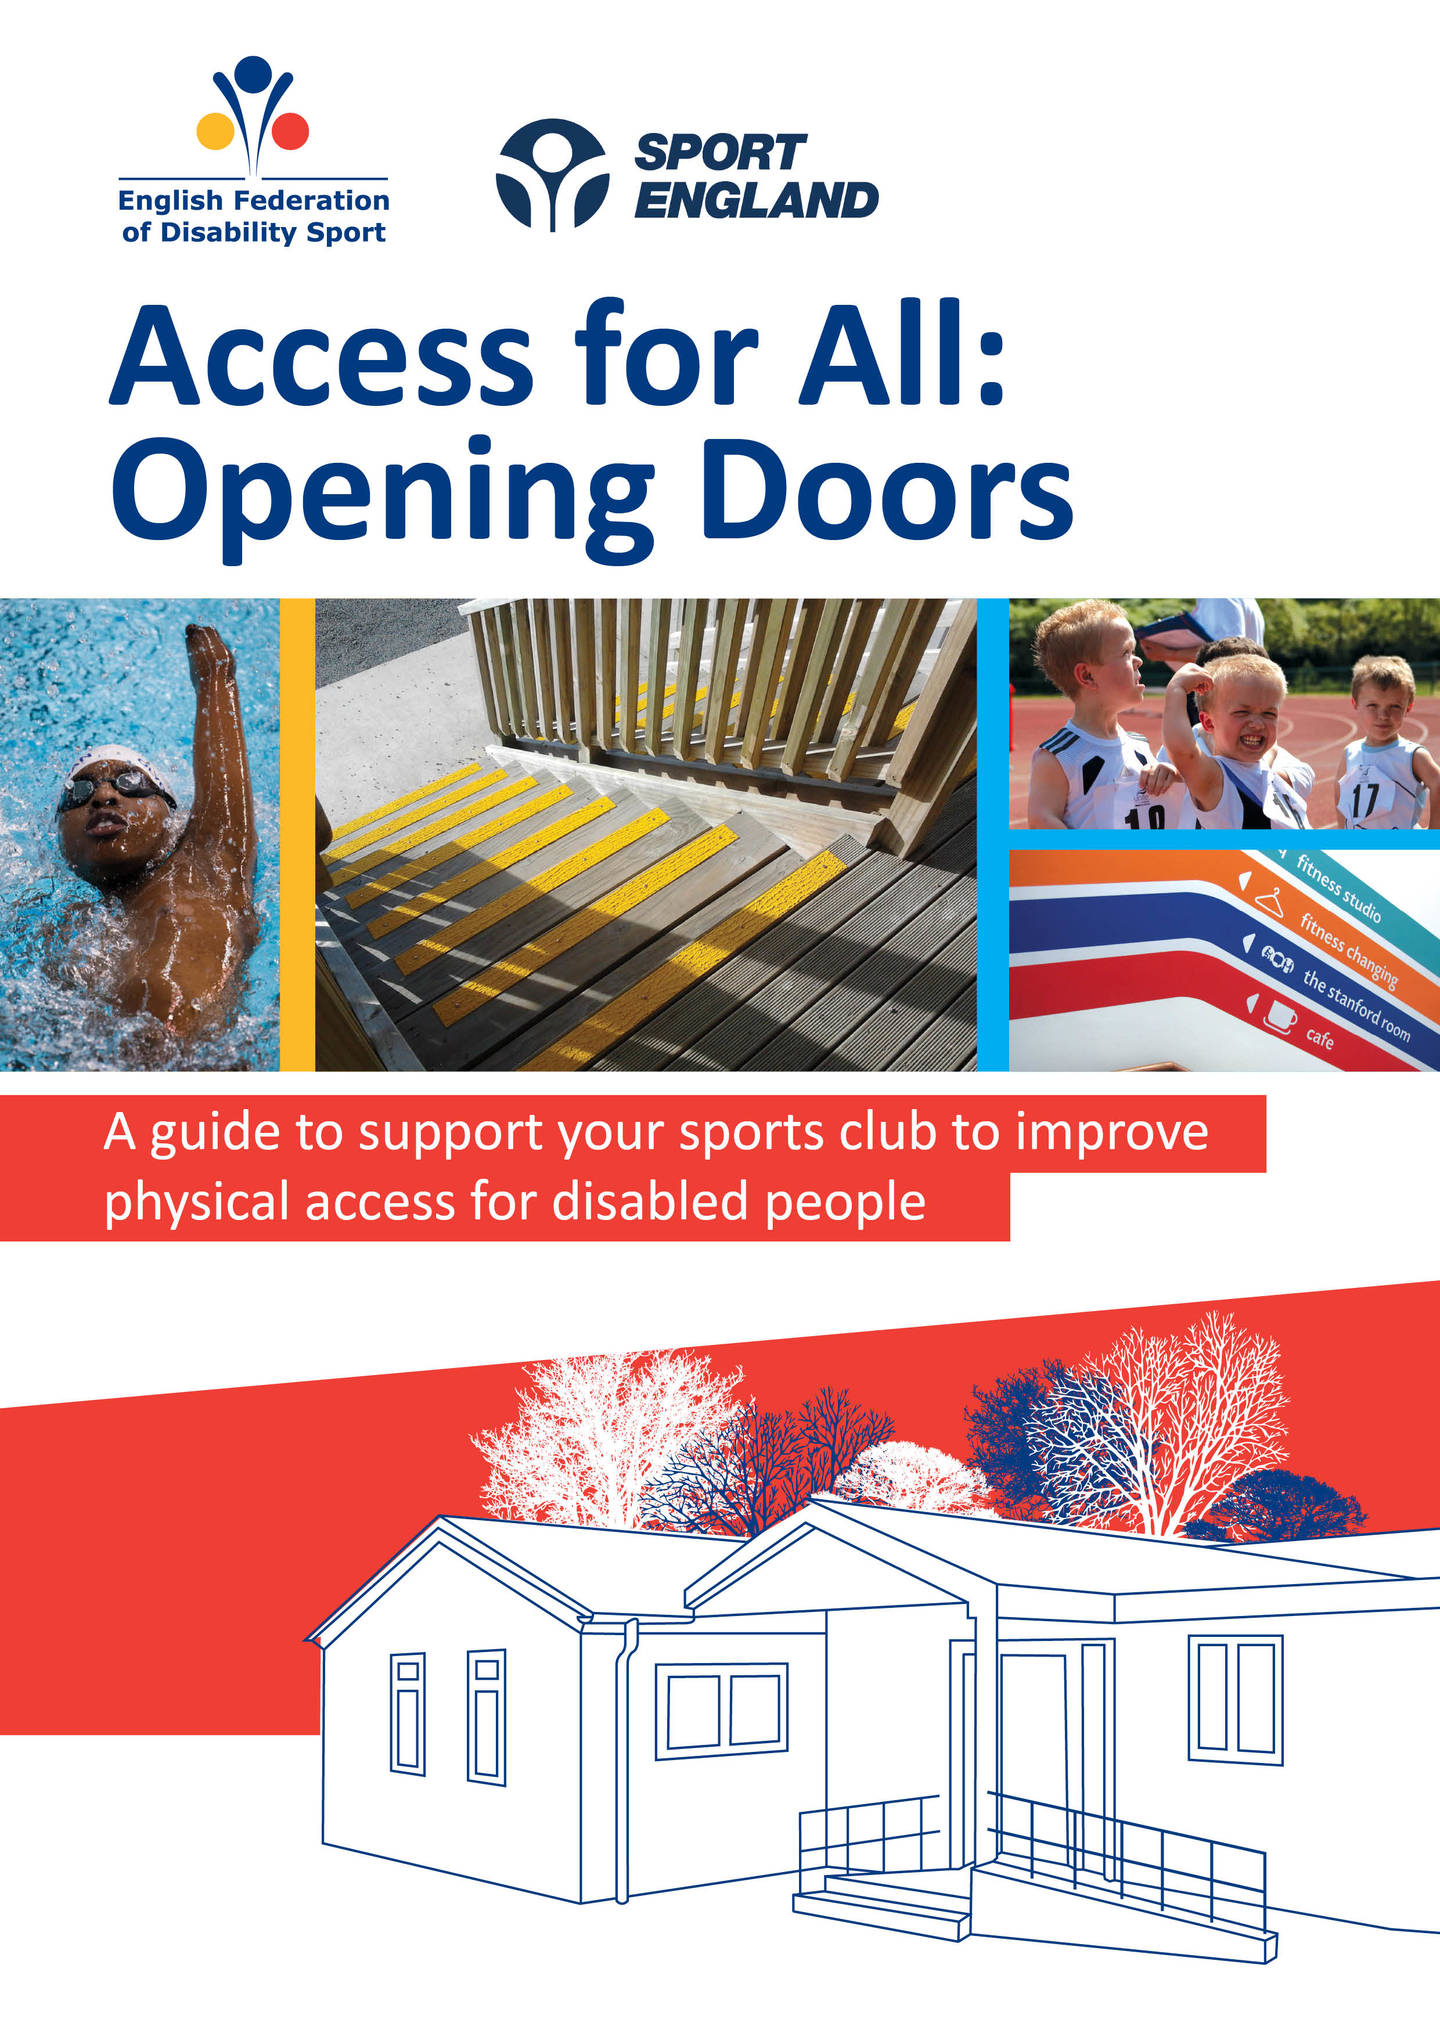 Access for all front cover